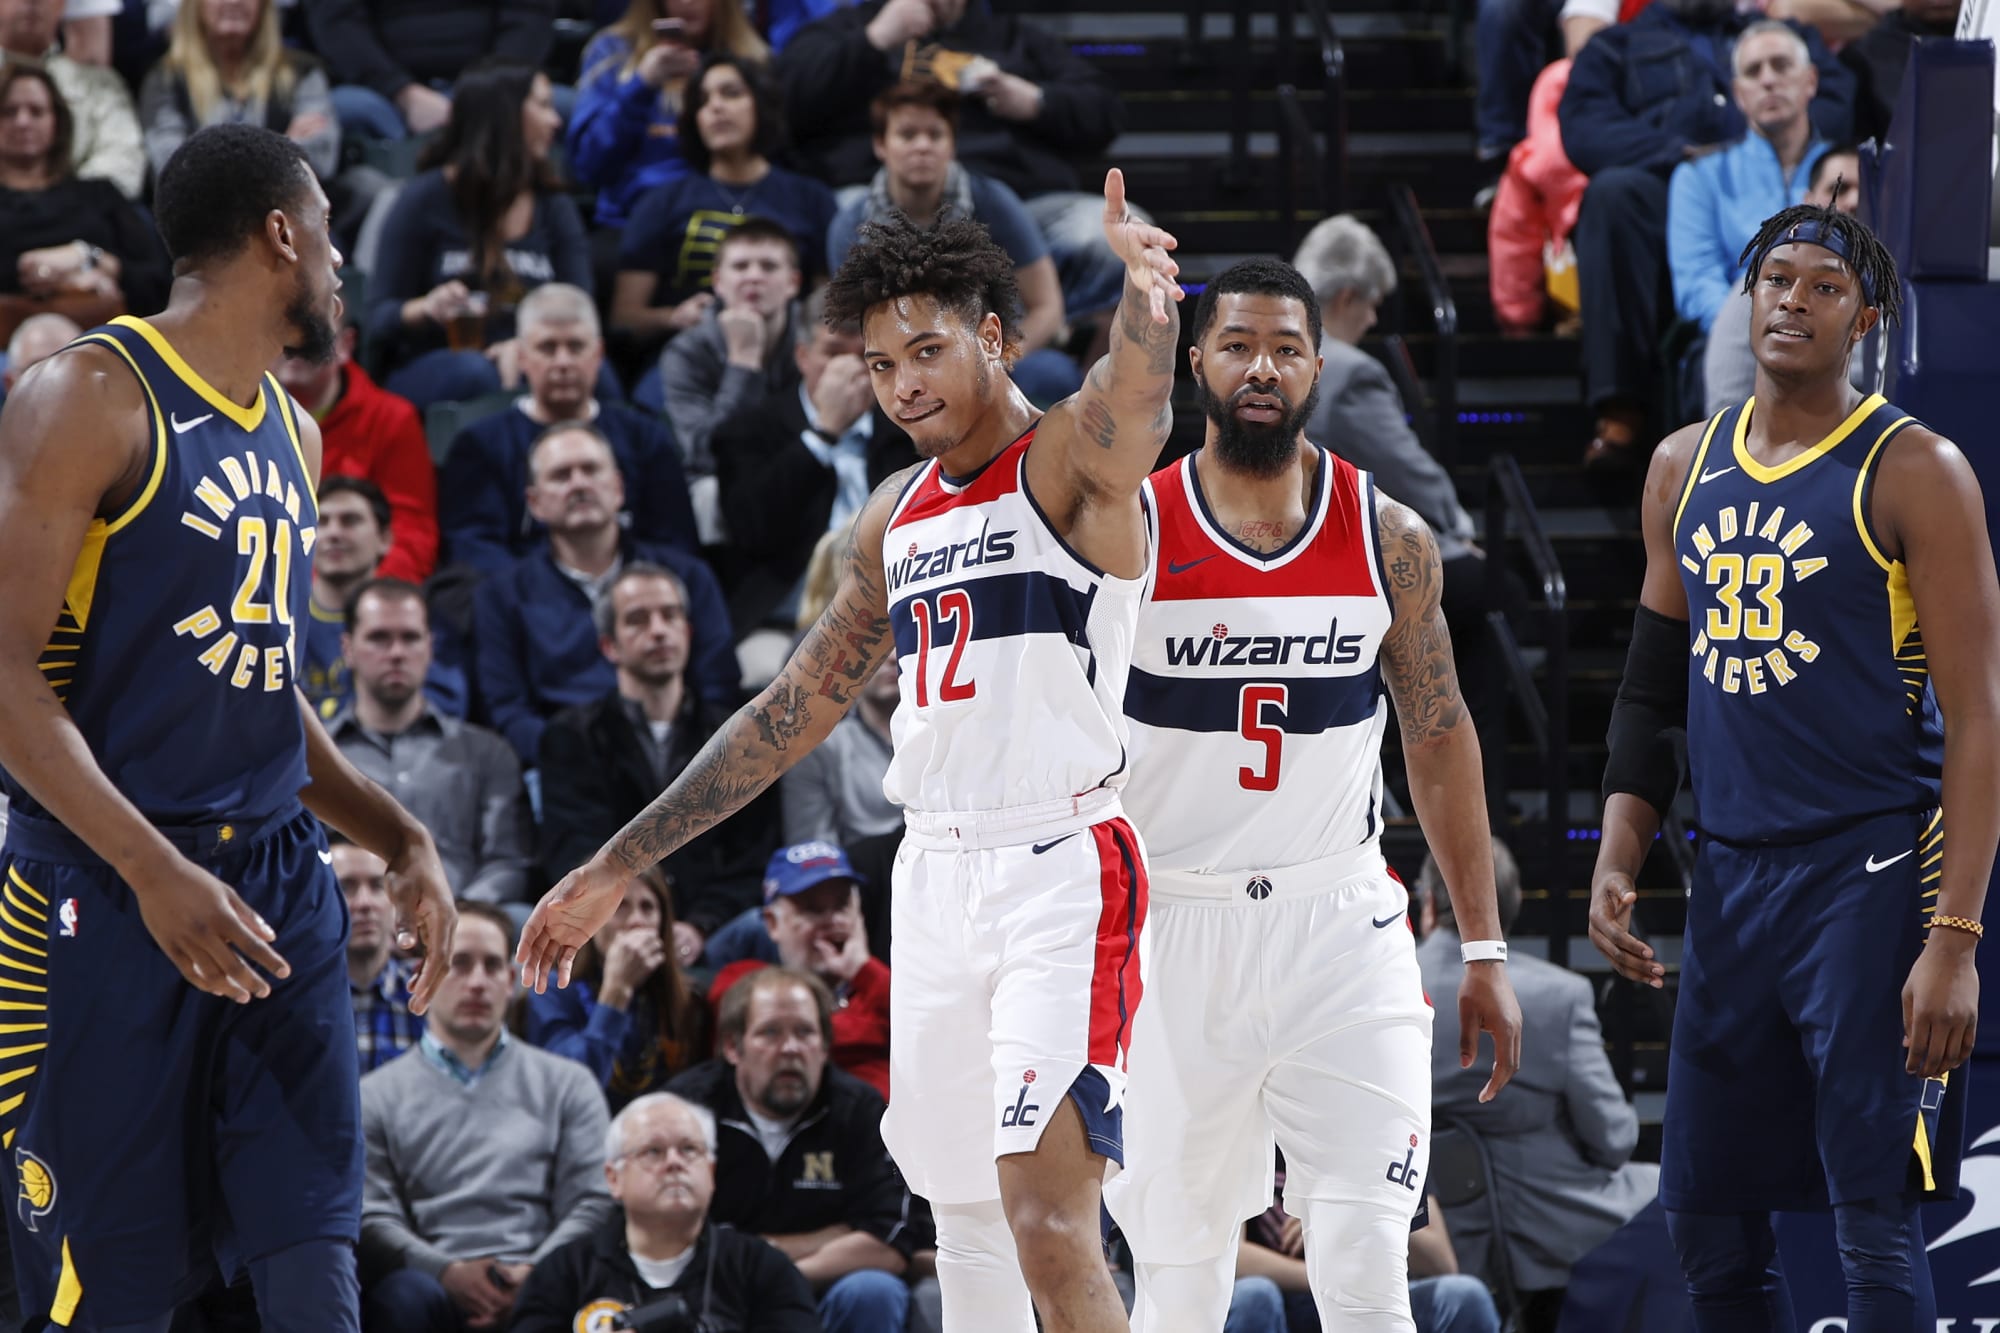 Wizards Winning Streak Reaches 5, After Beating Pacers in Indy